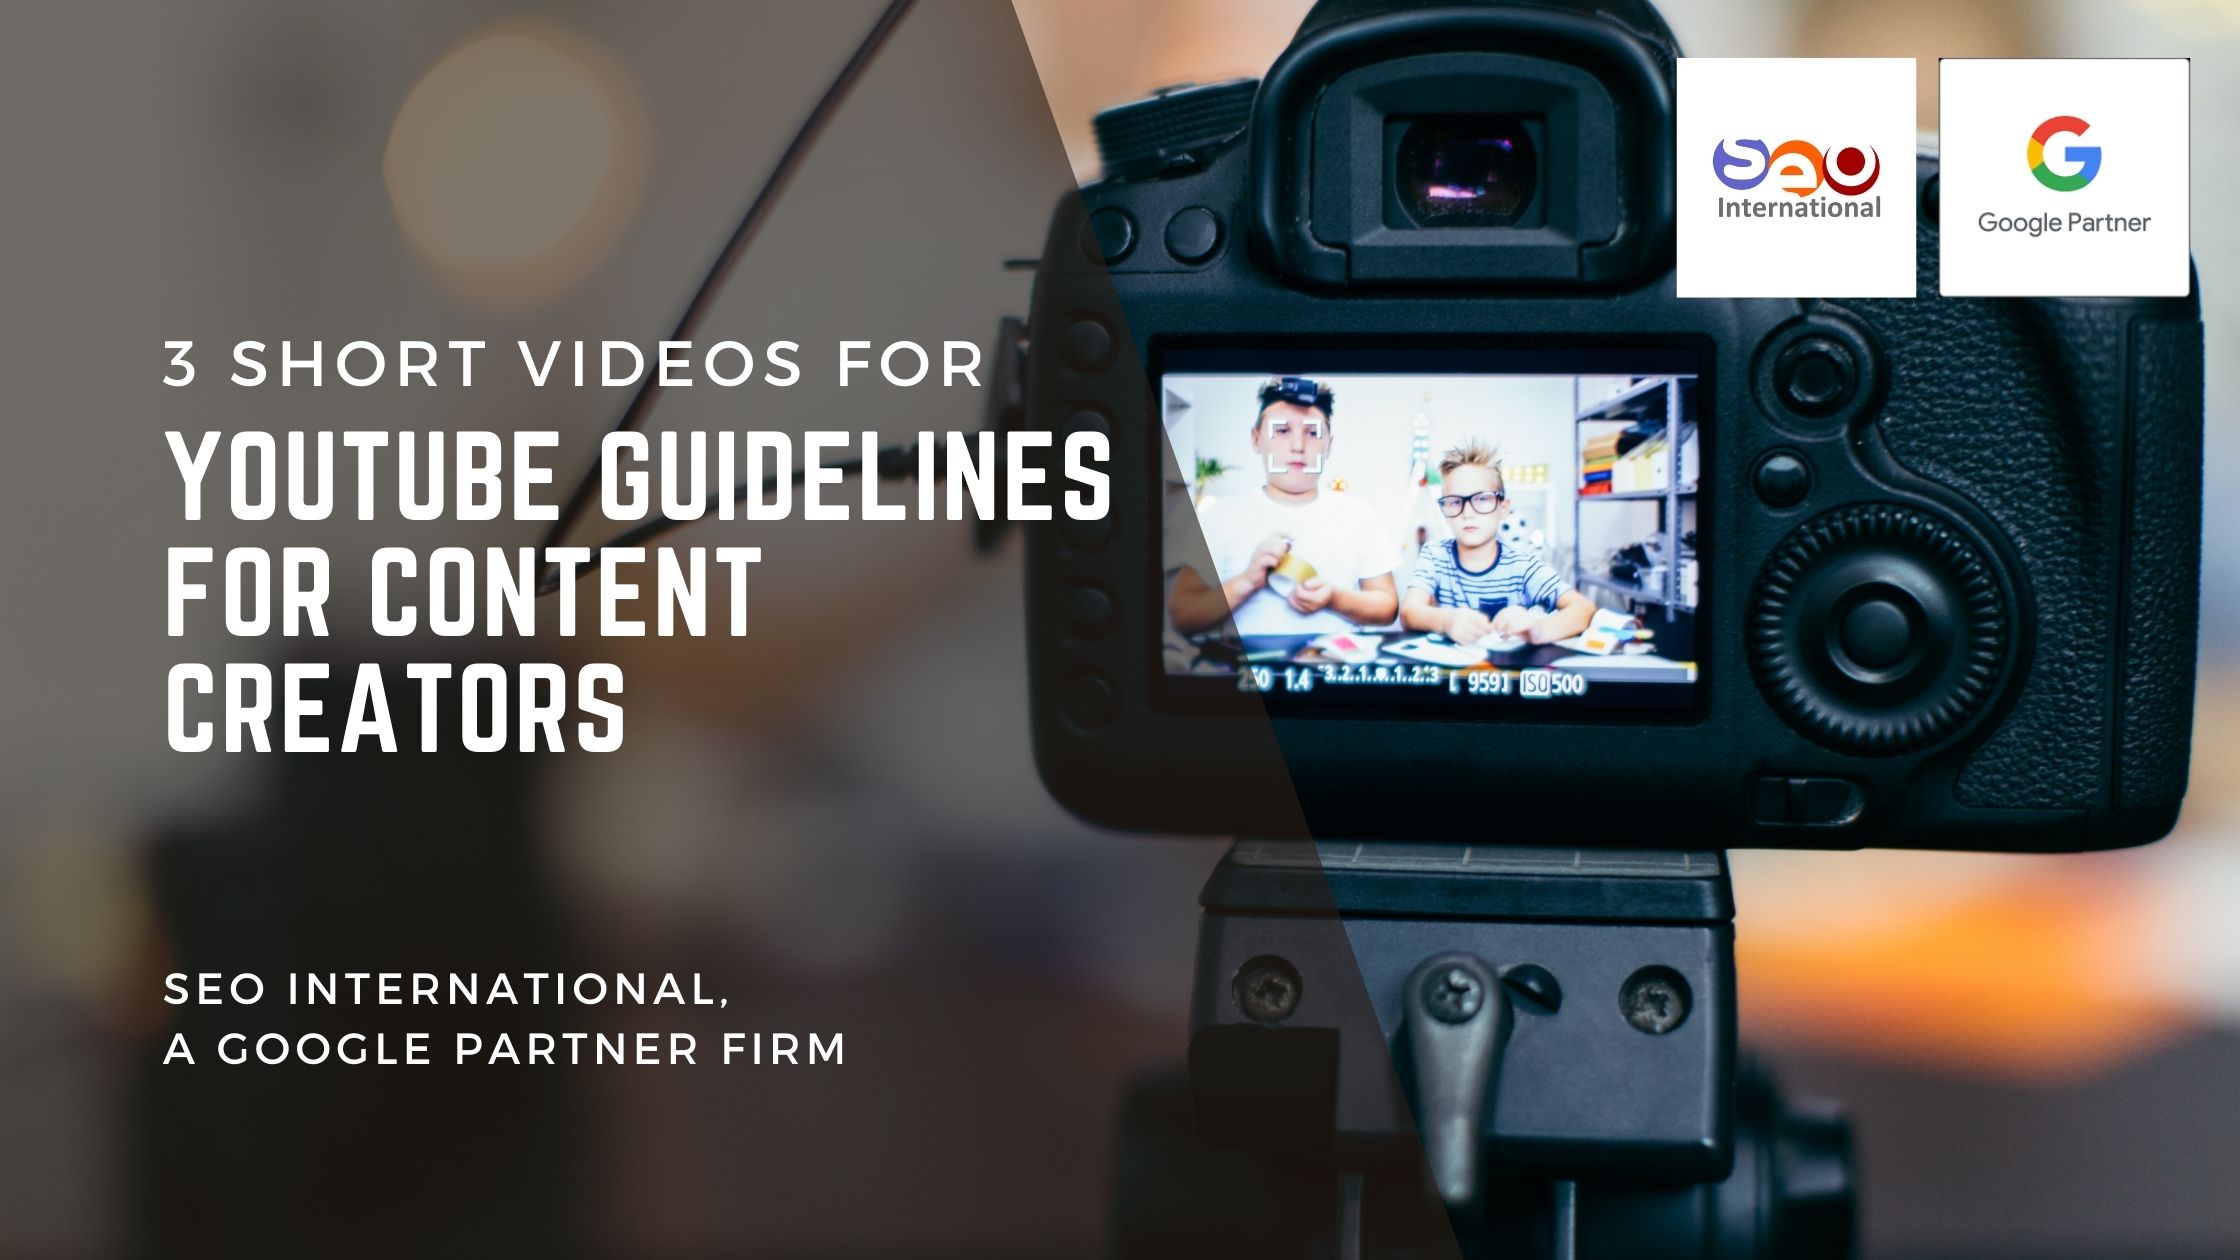 YouTube Guidelines for Content Creators